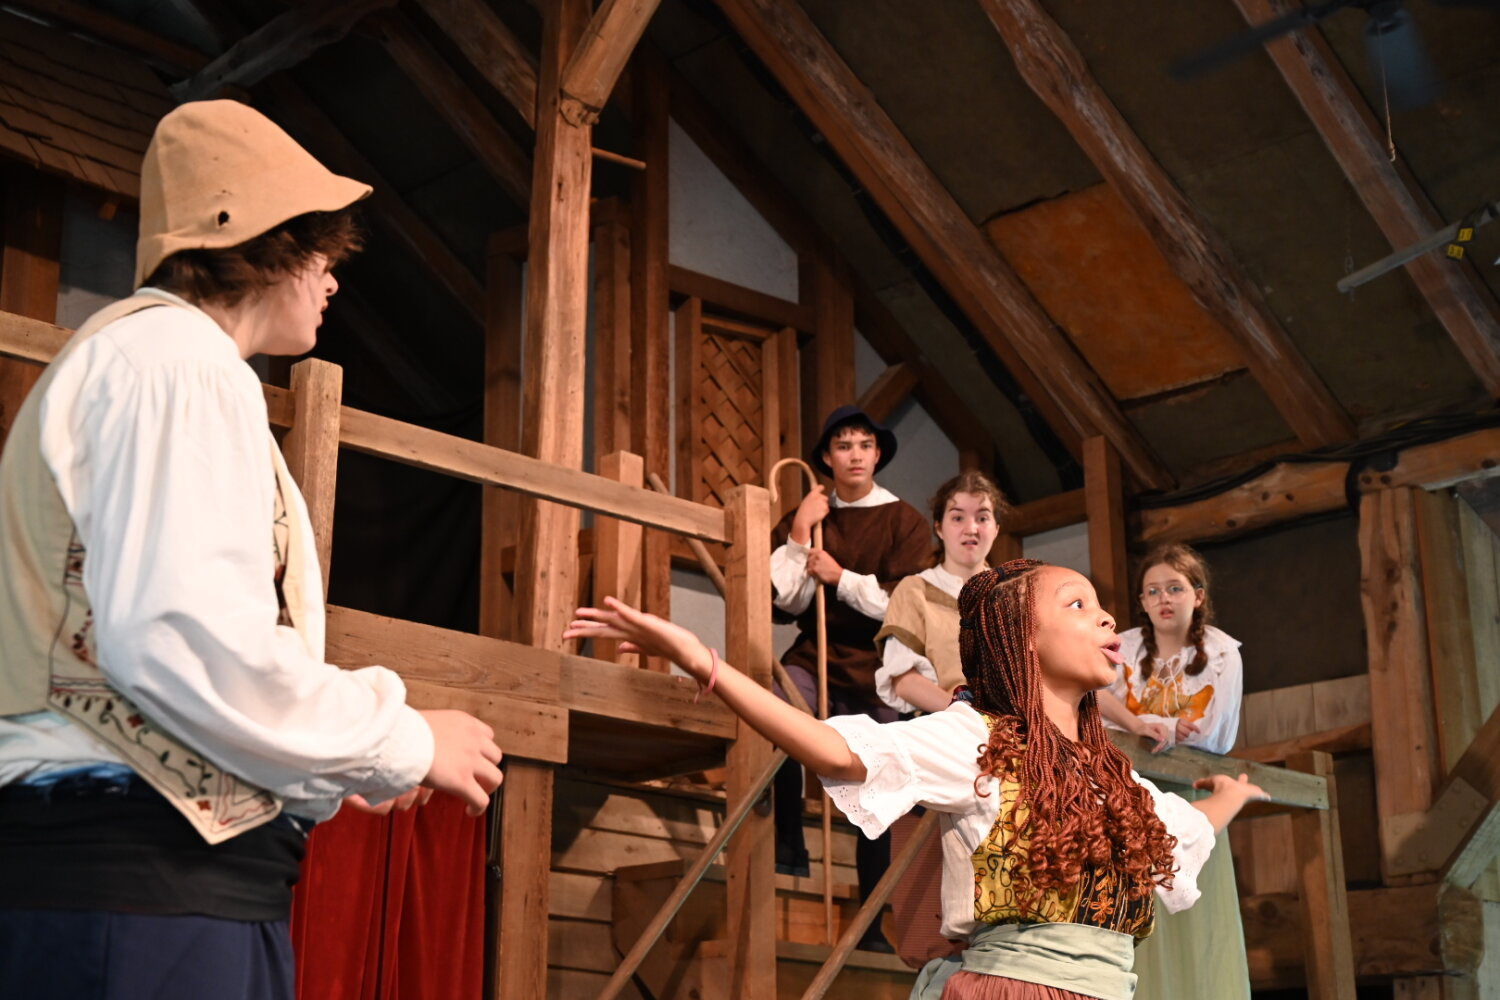 Camp Shakespeare Performance of As You Like It